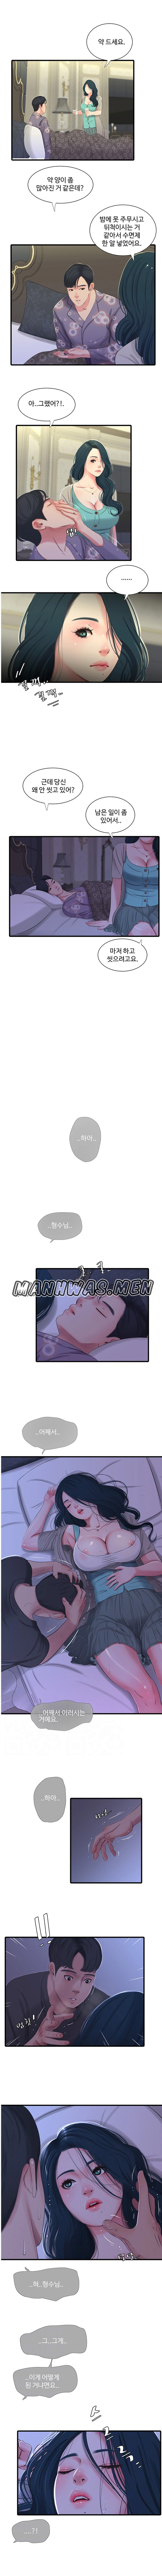 maidens-in-law-raw-chap-34-0